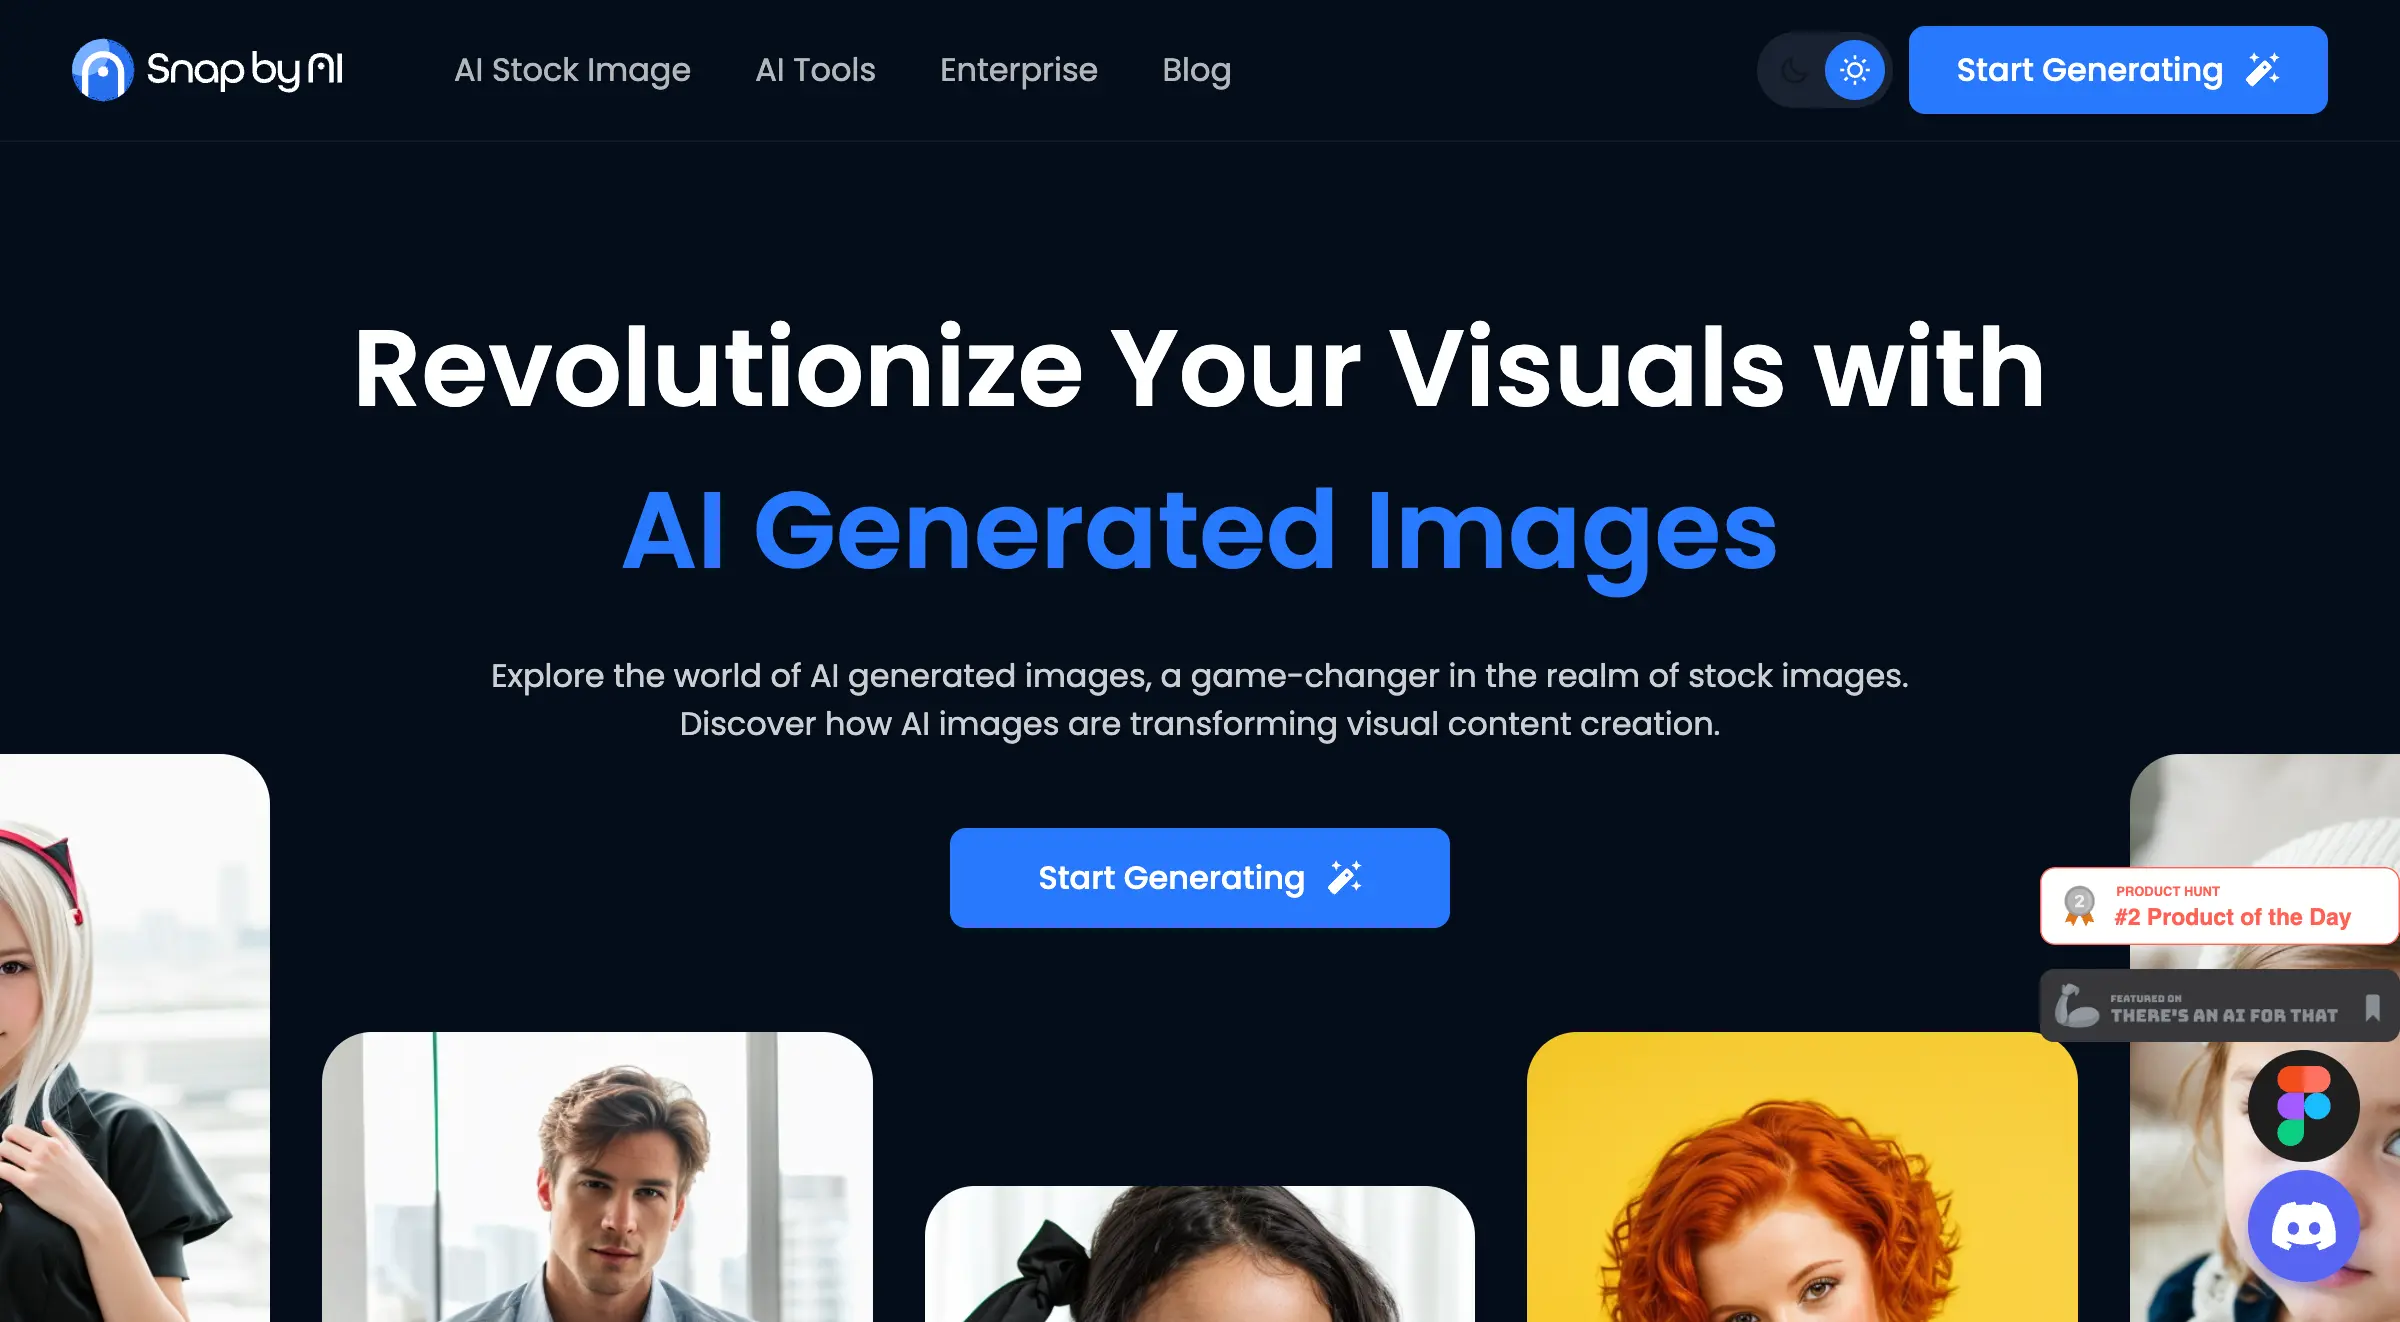 Snapby AI: Revolutionize Your Visuals with AI Generated Images